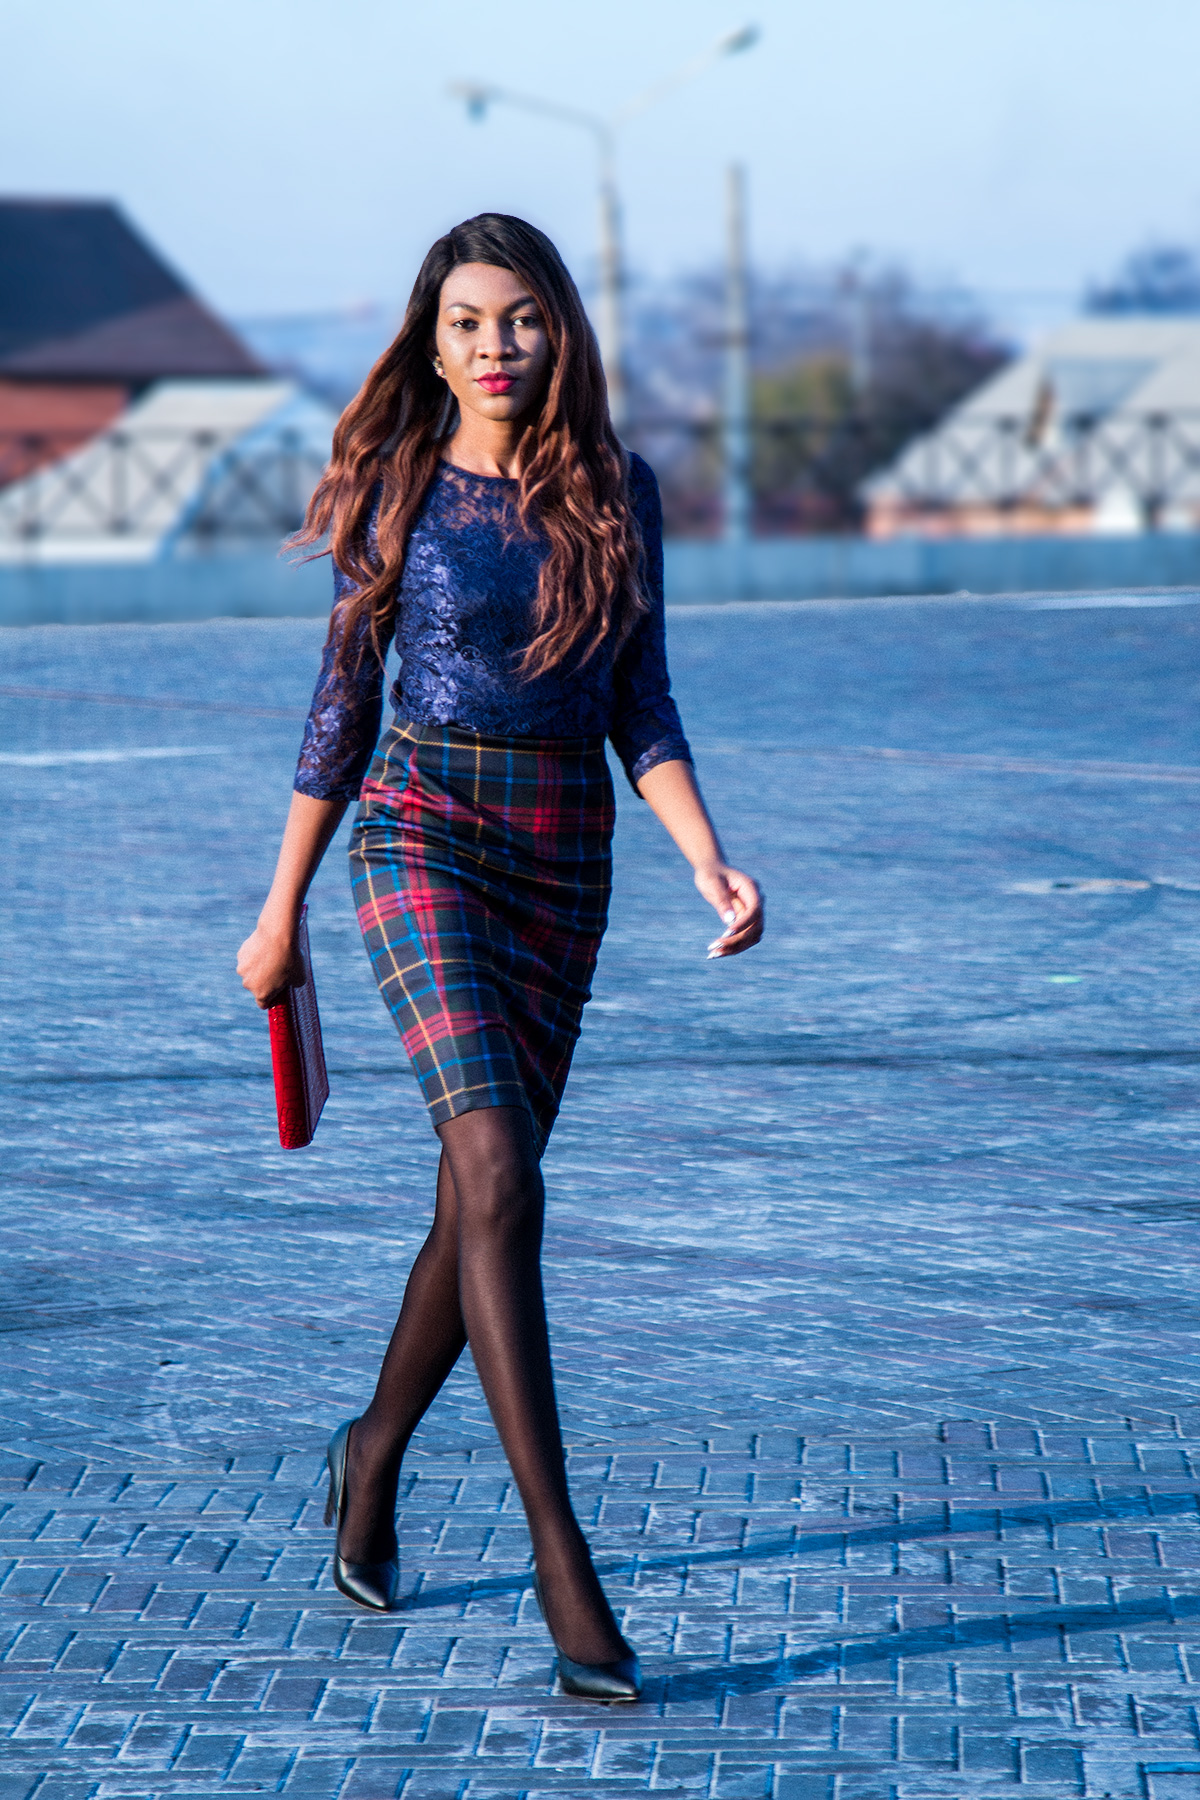 Black Lace Tights with Blue Dress Outfits (2 ideas & outfits